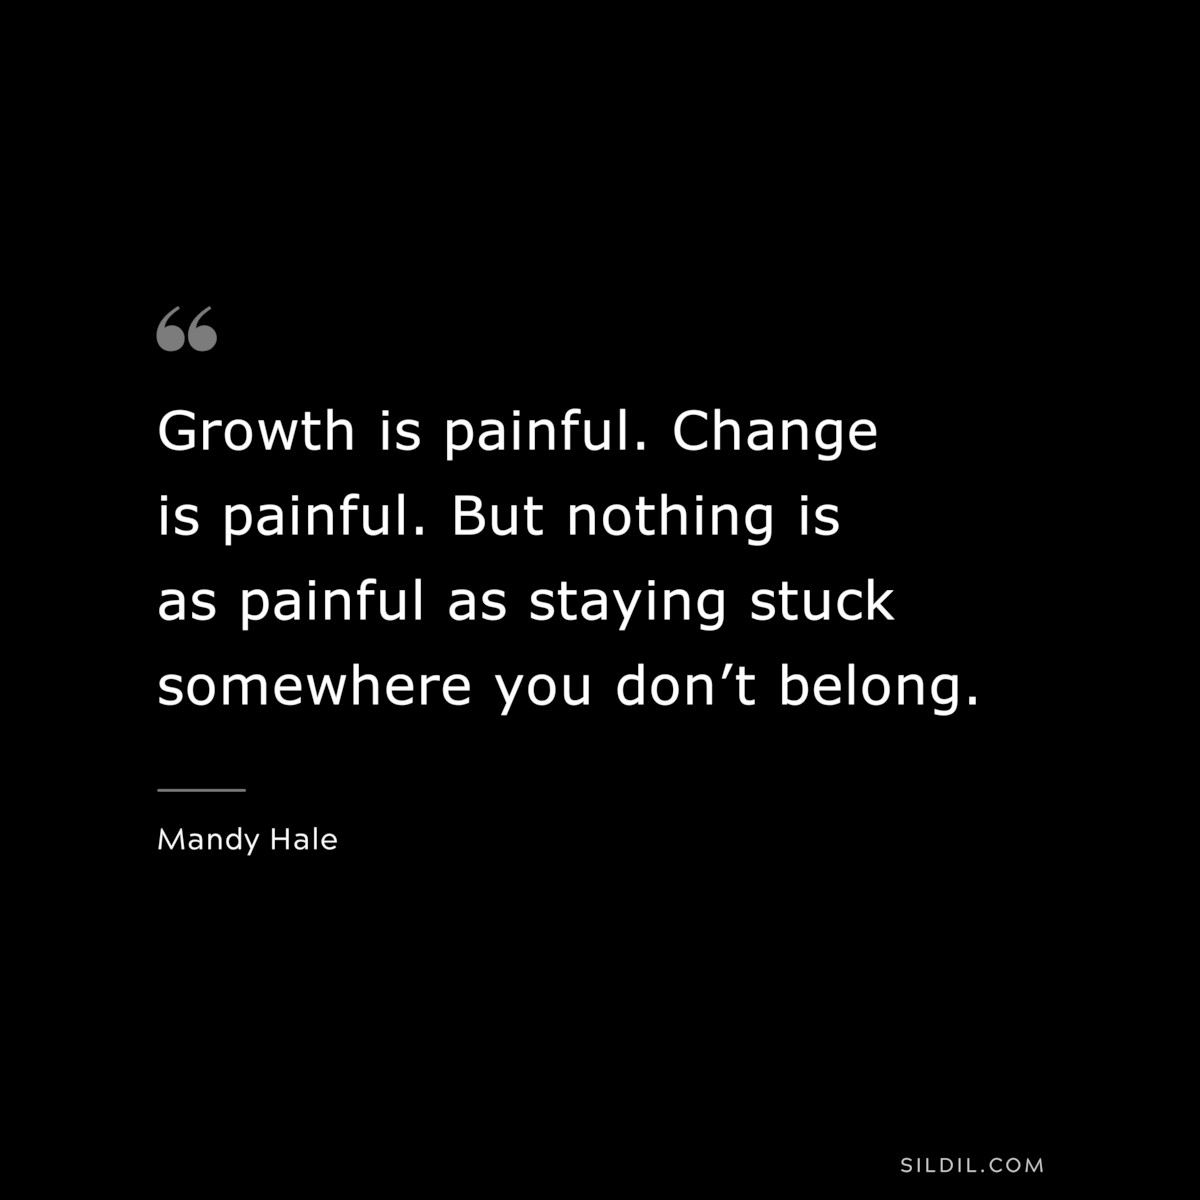 Growth is painful. Change is painful. But nothing is as painful as staying stuck somewhere you don’t belong. ― Mandy Hale